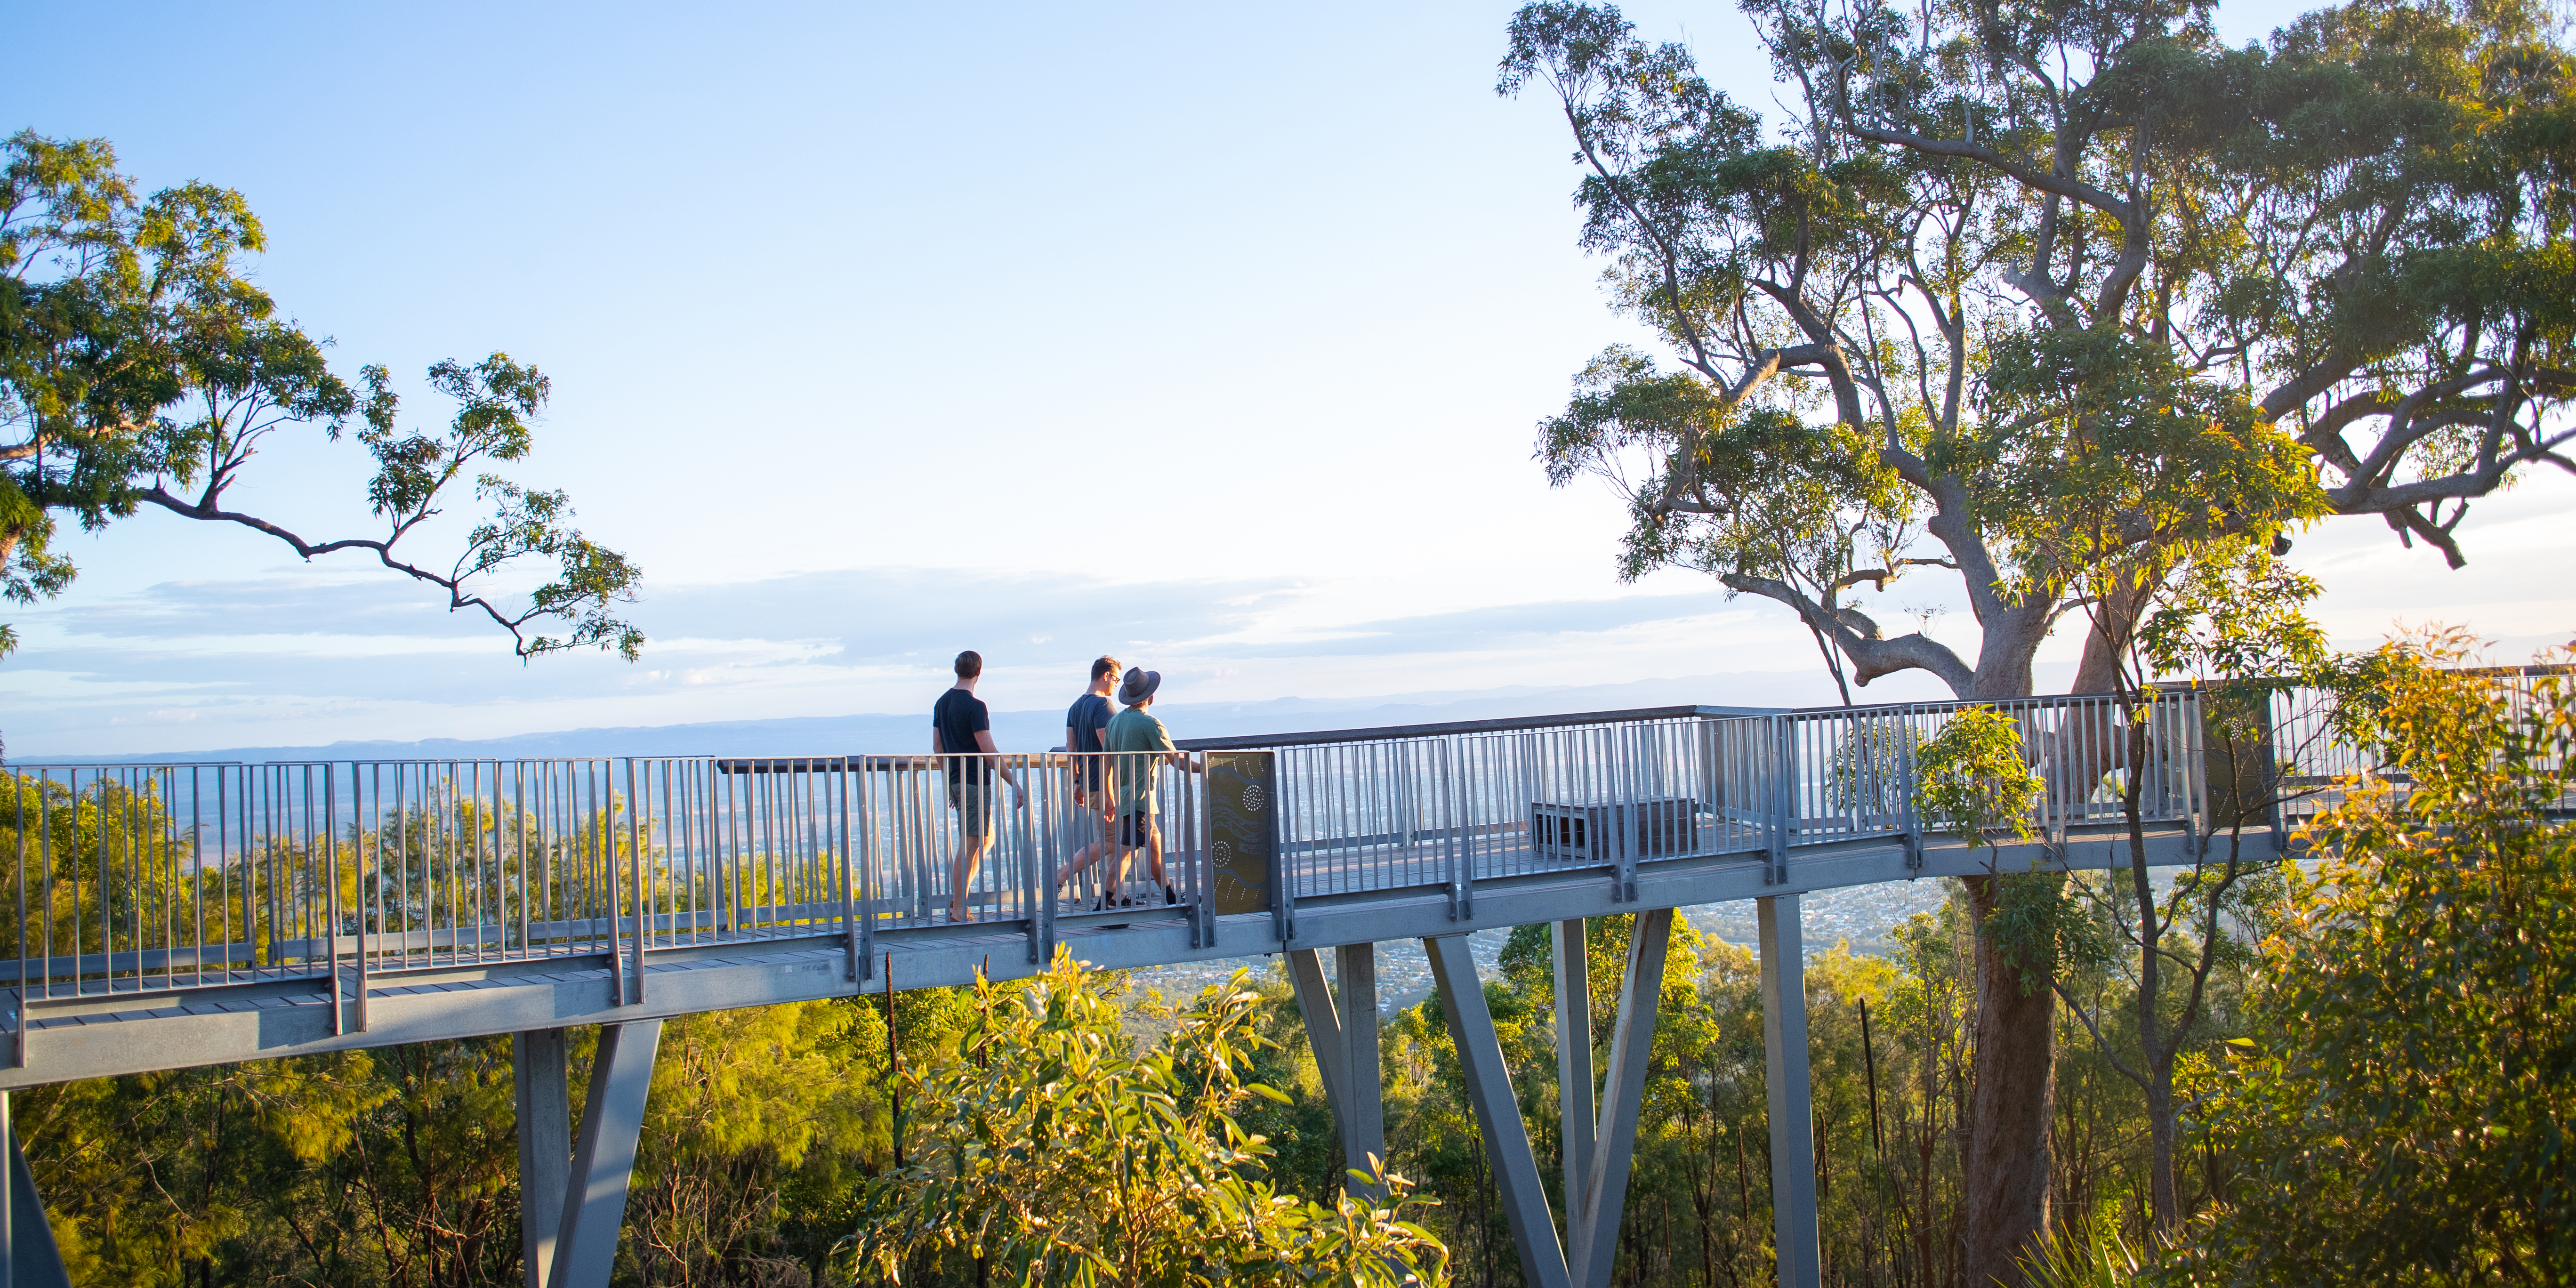 Three hikers walking along an elevated boardwalk overlooking mountains